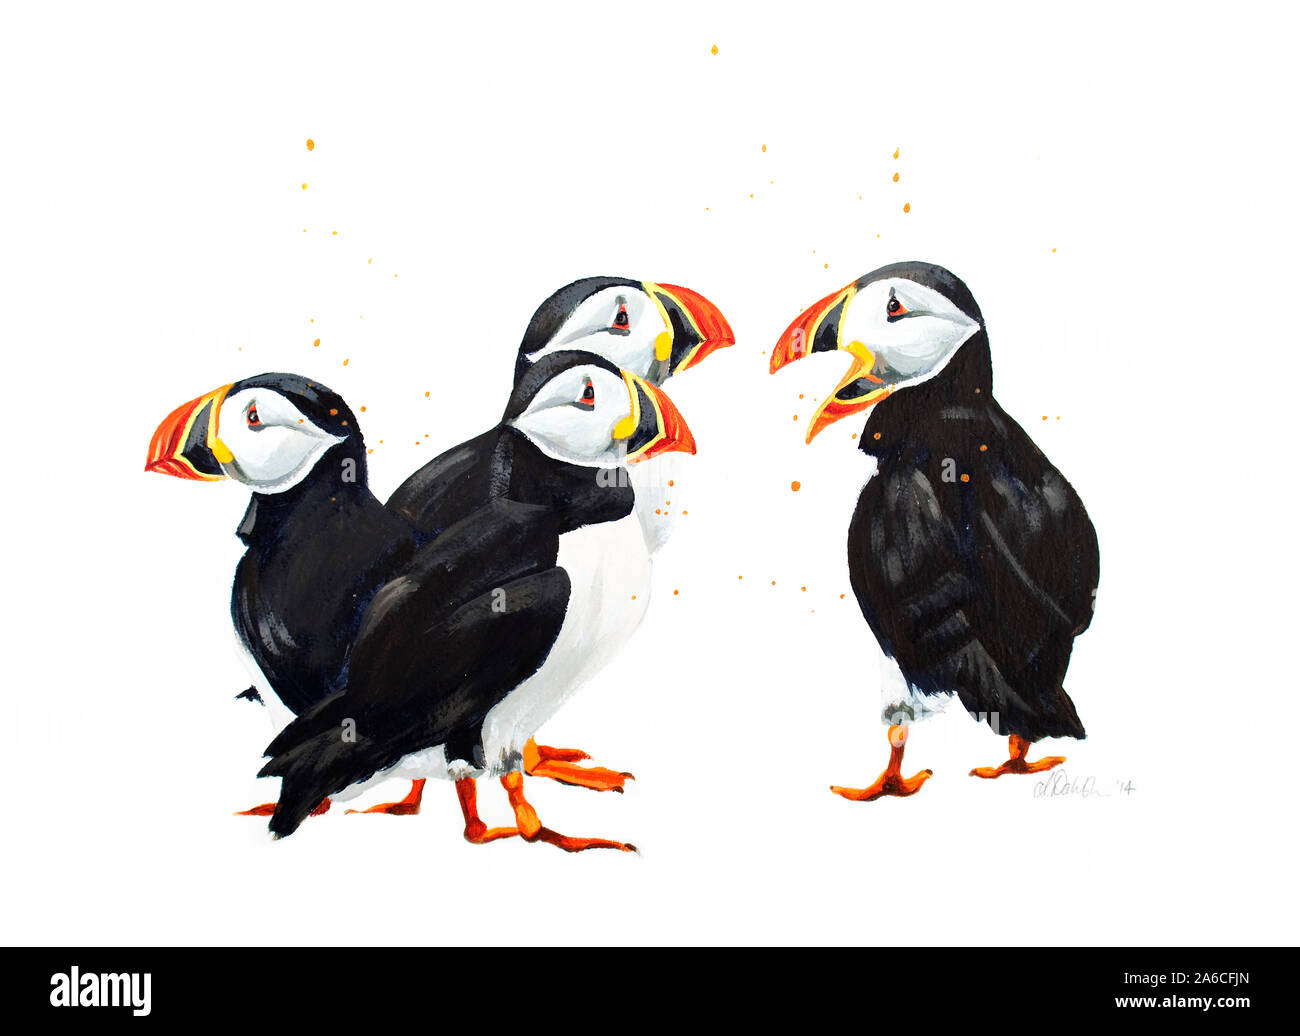 Painting of a group of puffins Stock Photo